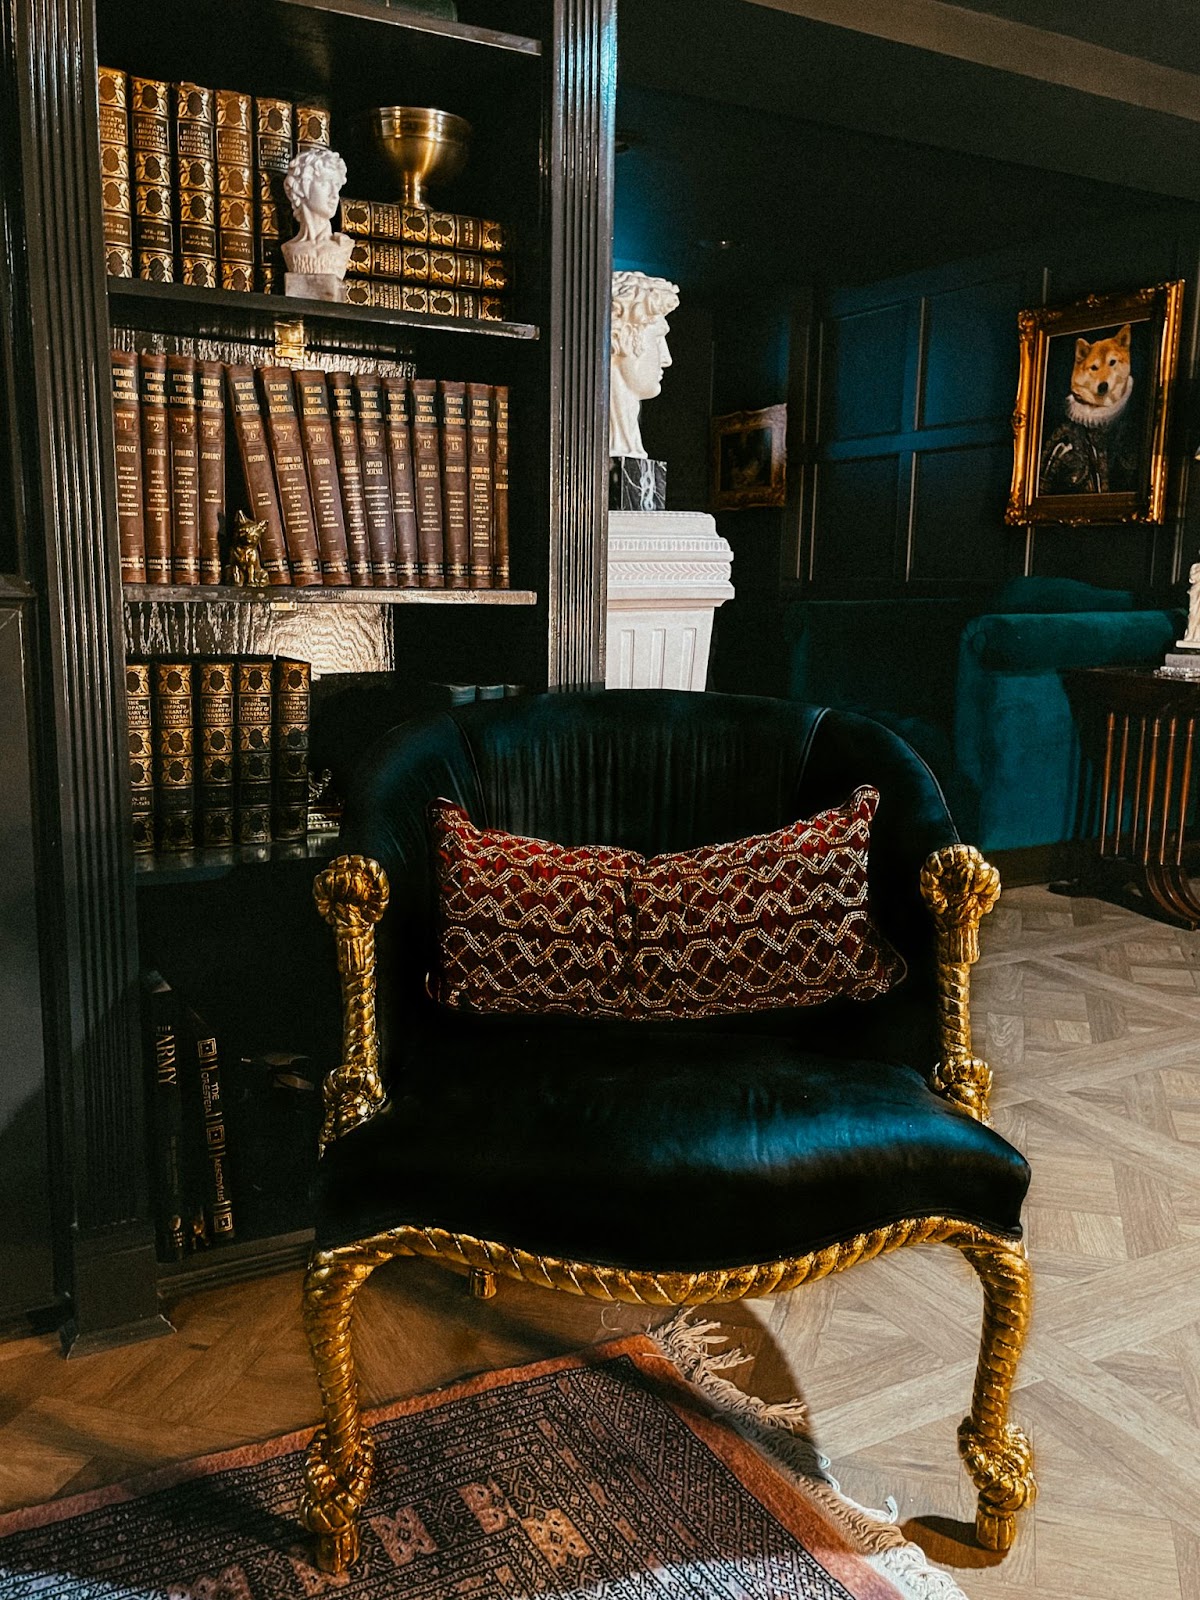 A reading corner anchored by a magnificent dark emerald green color on the wall and the furniture and complemented by the presence of a bookshelf filled with leather-bound books and charming busts.